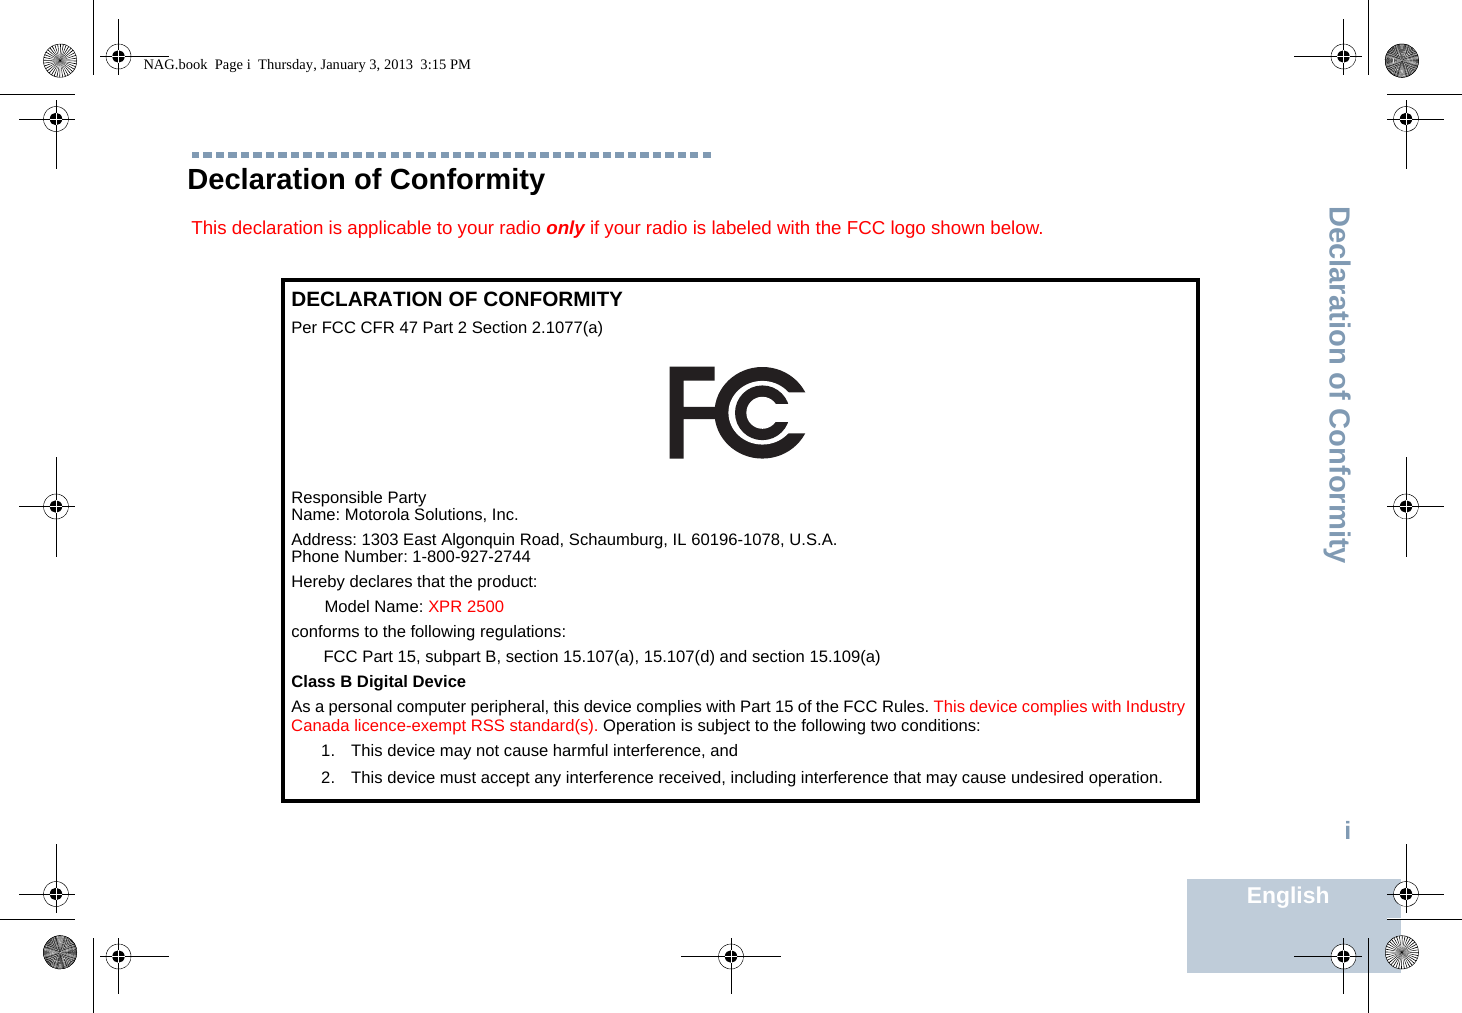 Declaration of ConformityEnglishiDeclaration of ConformityThis declaration is applicable to your radio only if your radio is labeled with the FCC logo shown below.DECLARATION OF CONFORMITYPer FCC CFR 47 Part 2 Section 2.1077(a)Responsible Party Name: Motorola Solutions, Inc.Address: 1303 East Algonquin Road, Schaumburg, IL 60196-1078, U.S.A.Phone Number: 1-800-927-2744Hereby declares that the product:Model Name: XPR 2500conforms to the following regulations:FCC Part 15, subpart B, section 15.107(a), 15.107(d) and section 15.109(a)Class B Digital DeviceAs a personal computer peripheral, this device complies with Part 15 of the FCC Rules. This device complies with Industry Canada licence-exempt RSS standard(s). Operation is subject to the following two conditions:1. This device may not cause harmful interference, and 2. This device must accept any interference received, including interference that may cause undesired operation.NAG.book  Page i  Thursday, January 3, 2013  3:15 PM